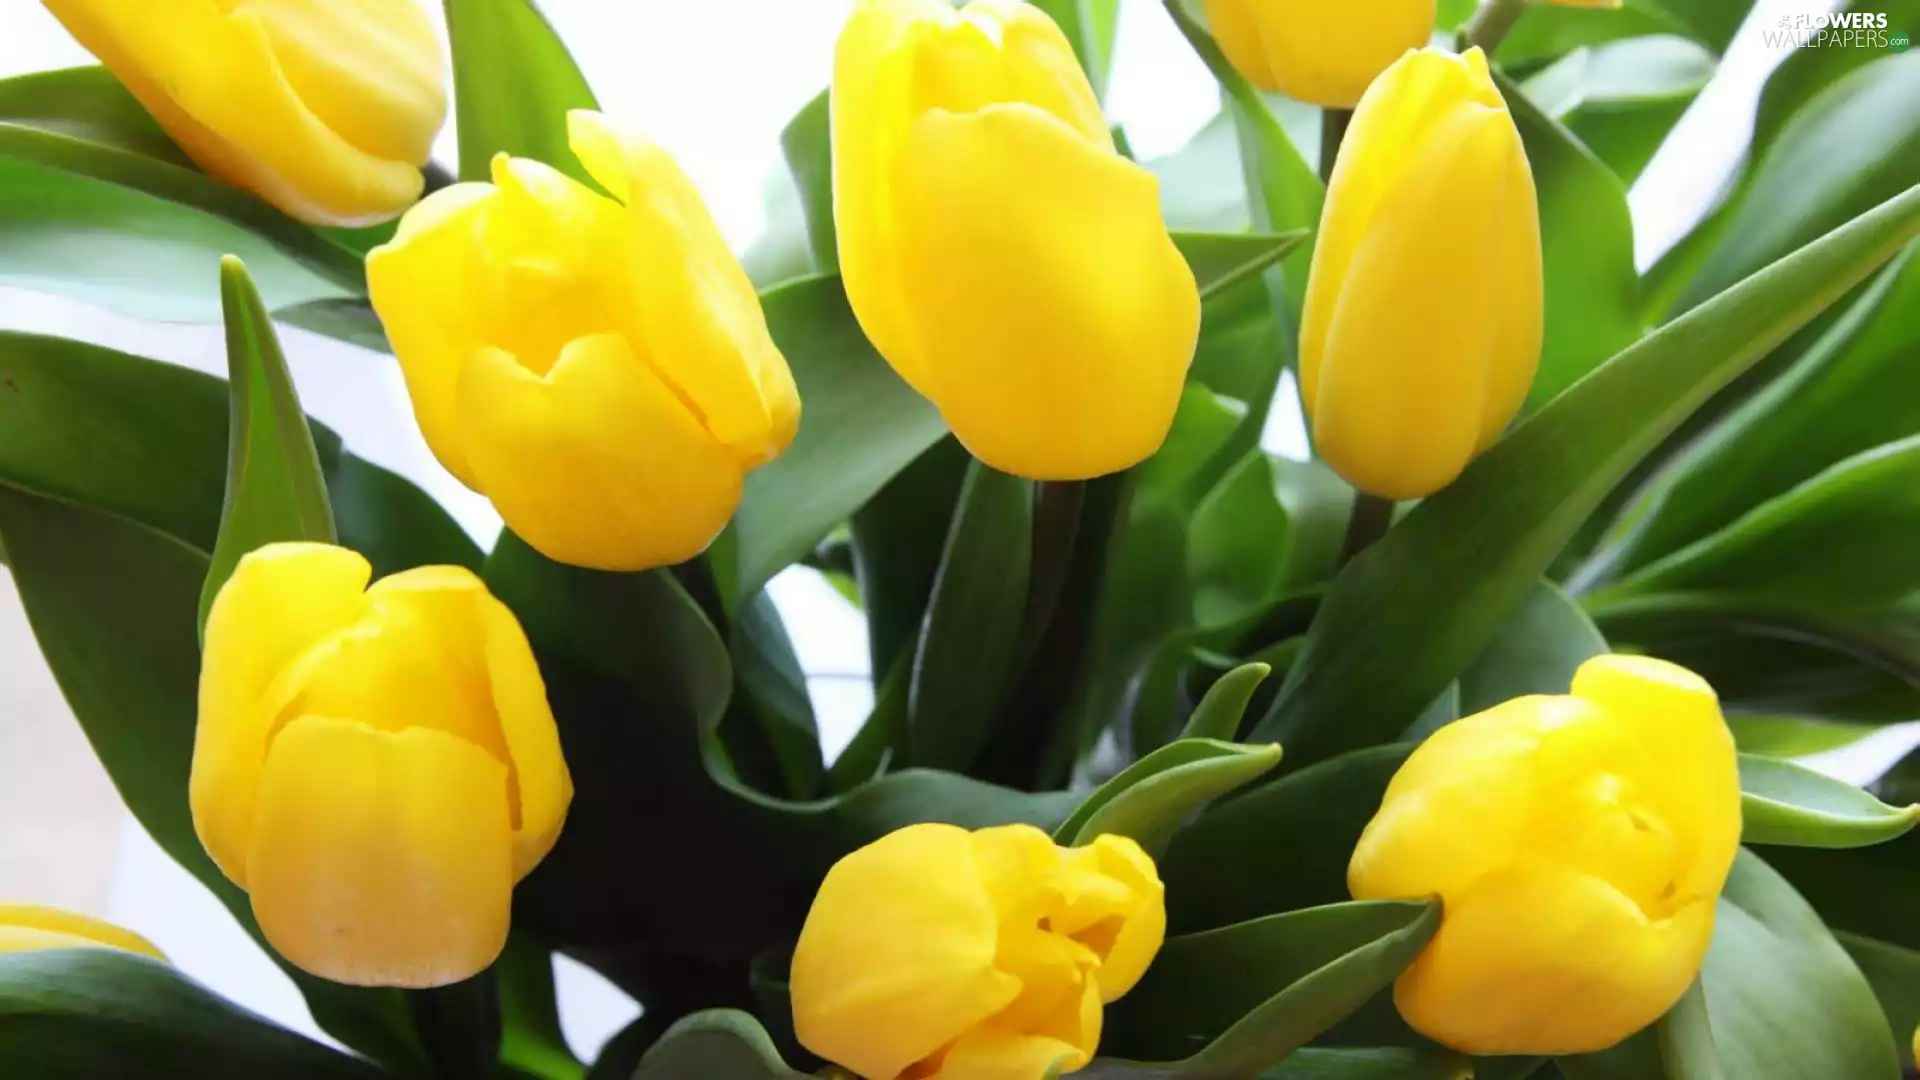 Yellow, green ones, leaves, Tulips